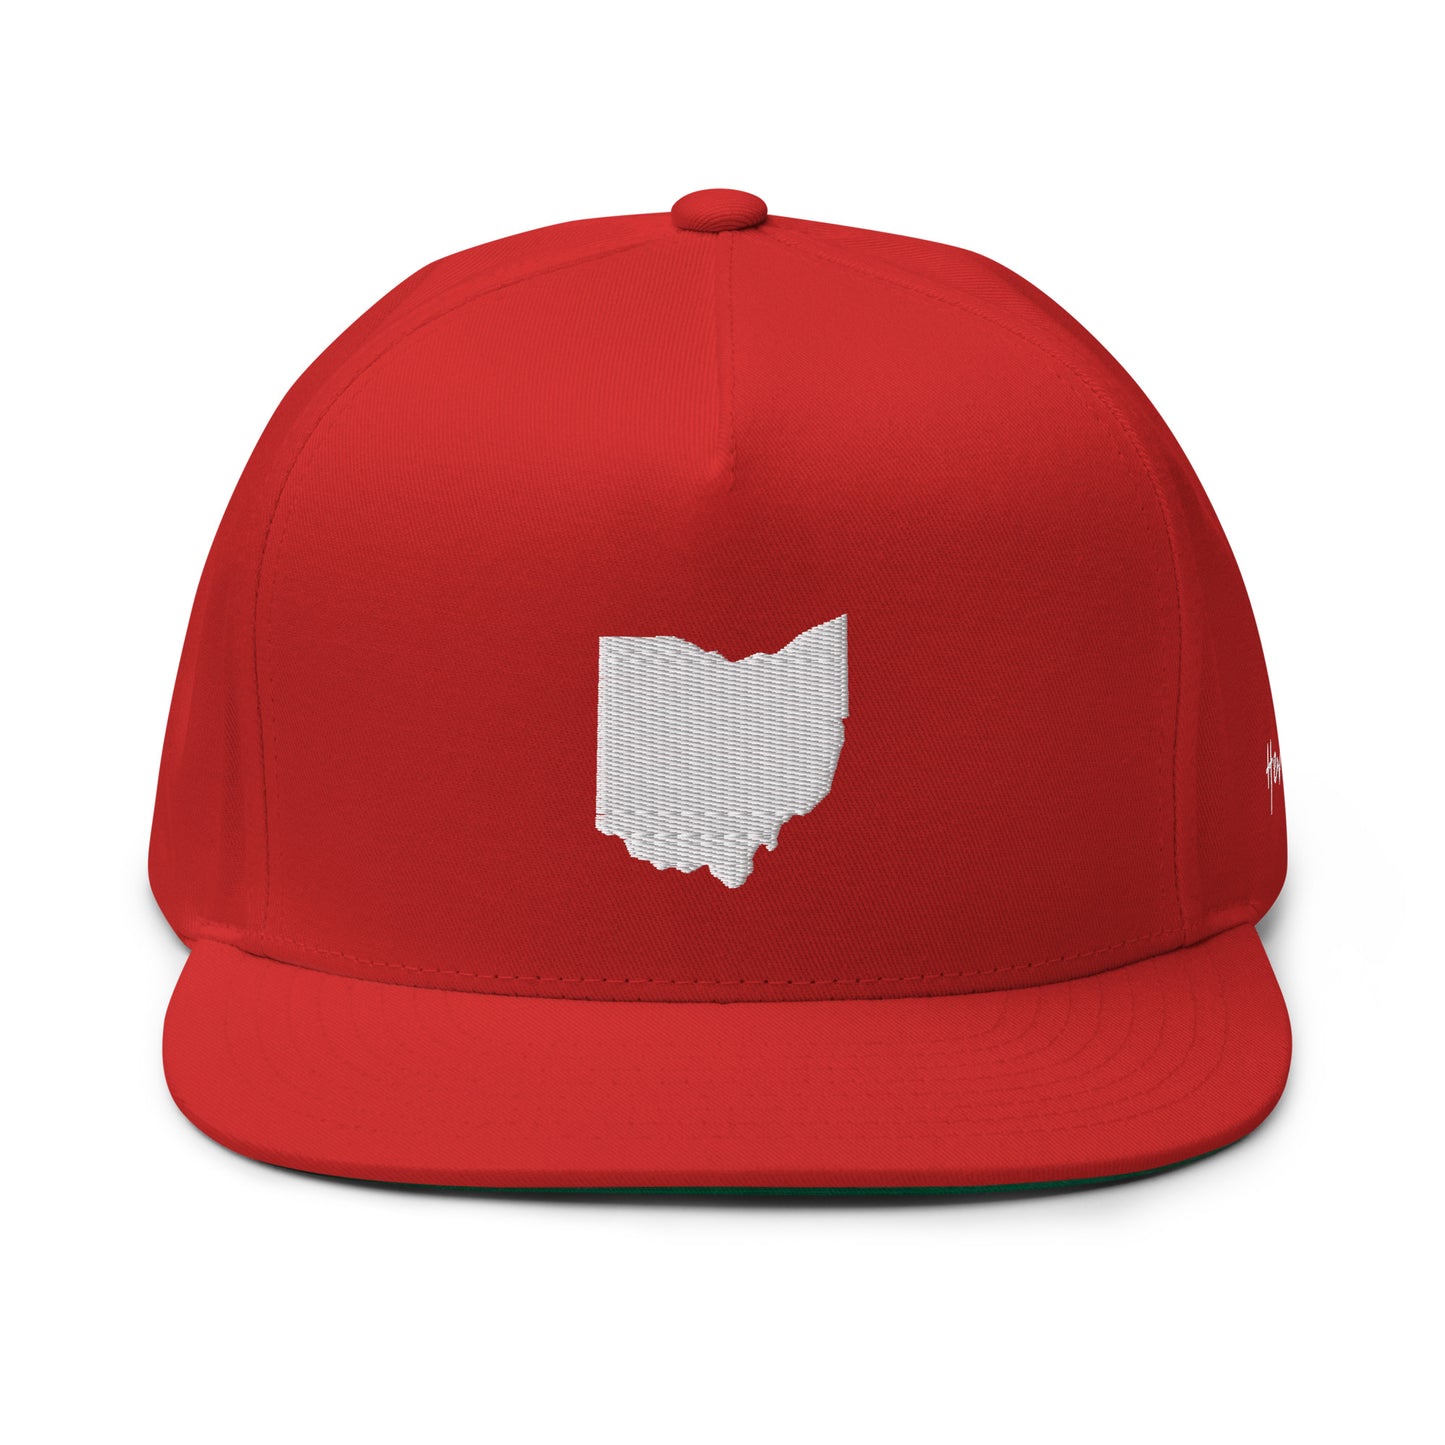 Ohio State Silhouette 5 Panel A-Frame Snapback Hat